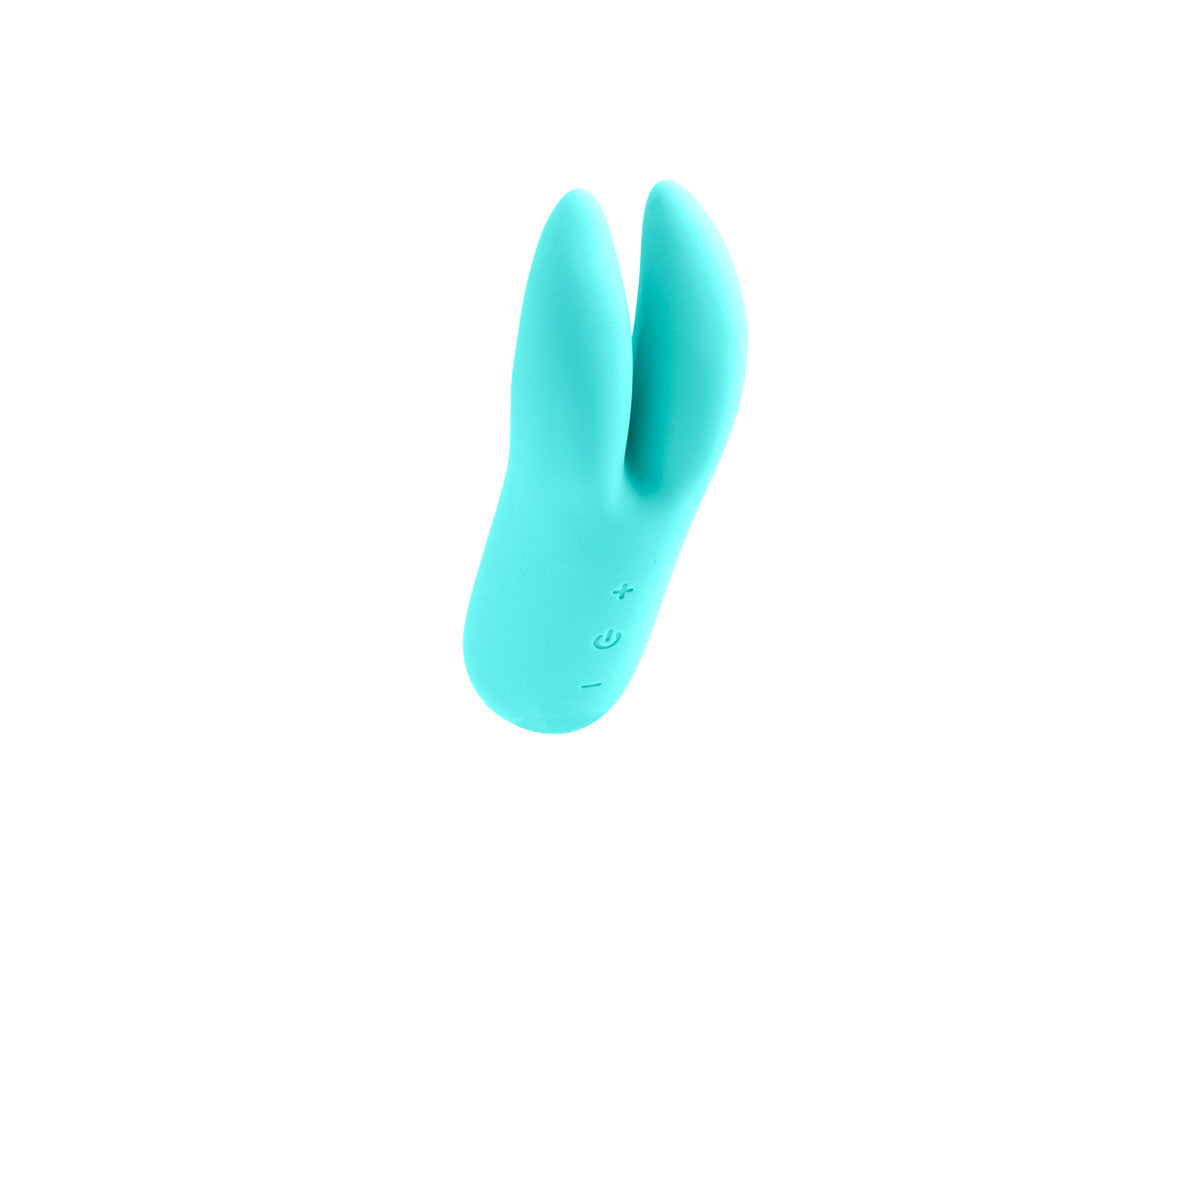 Kitti Rechargeable Dual Vibrator by Savvy Co.